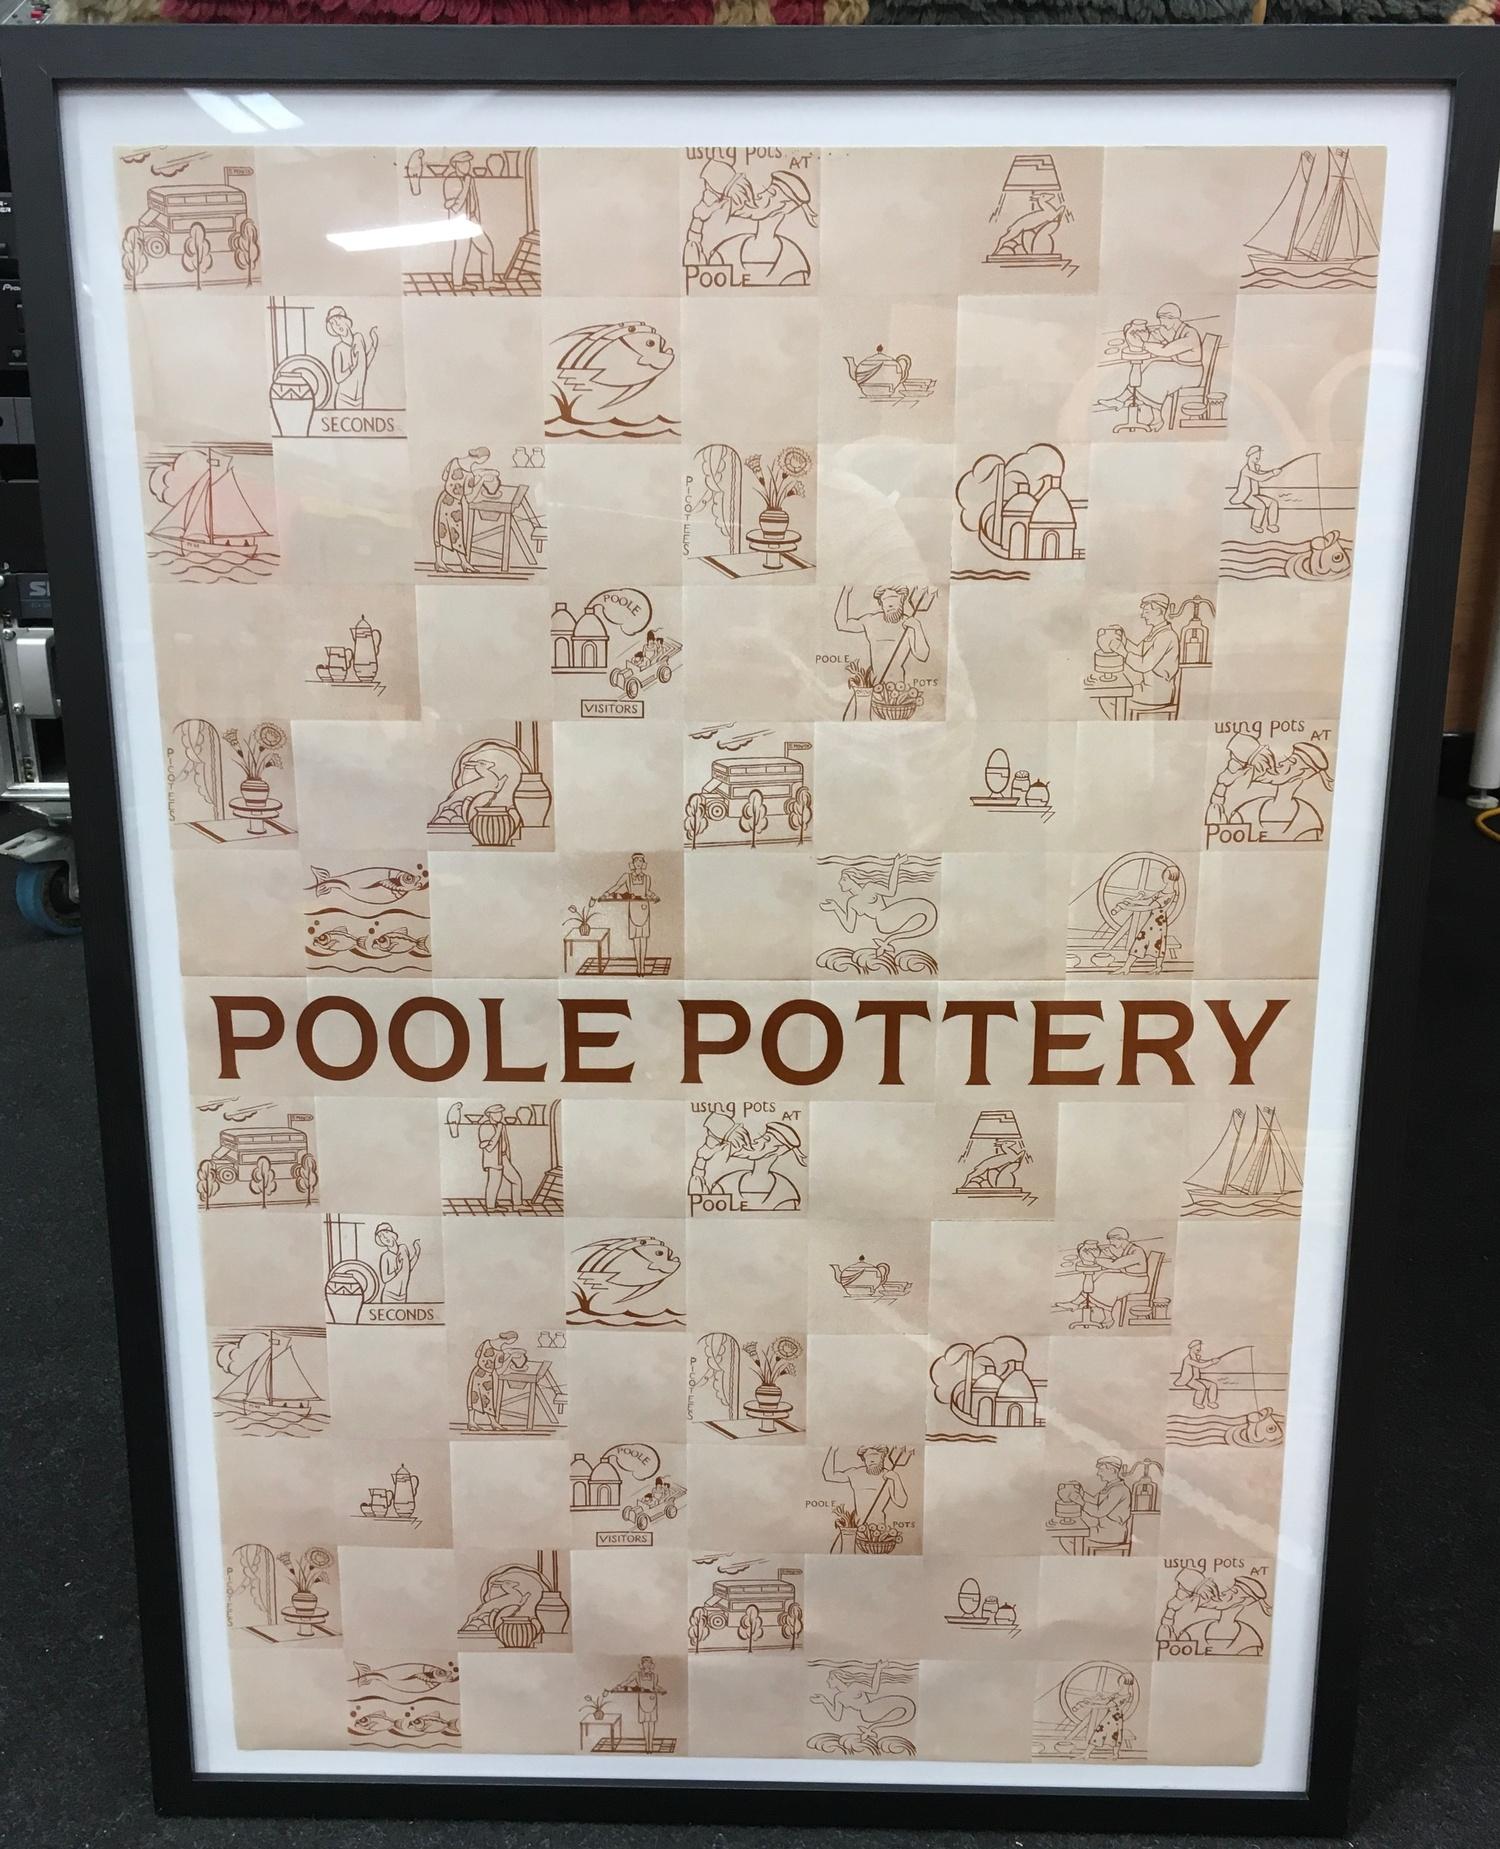 Edward Bawden for Poole Pottery: a framed poster print of the Bawden tile designs, from the Poole